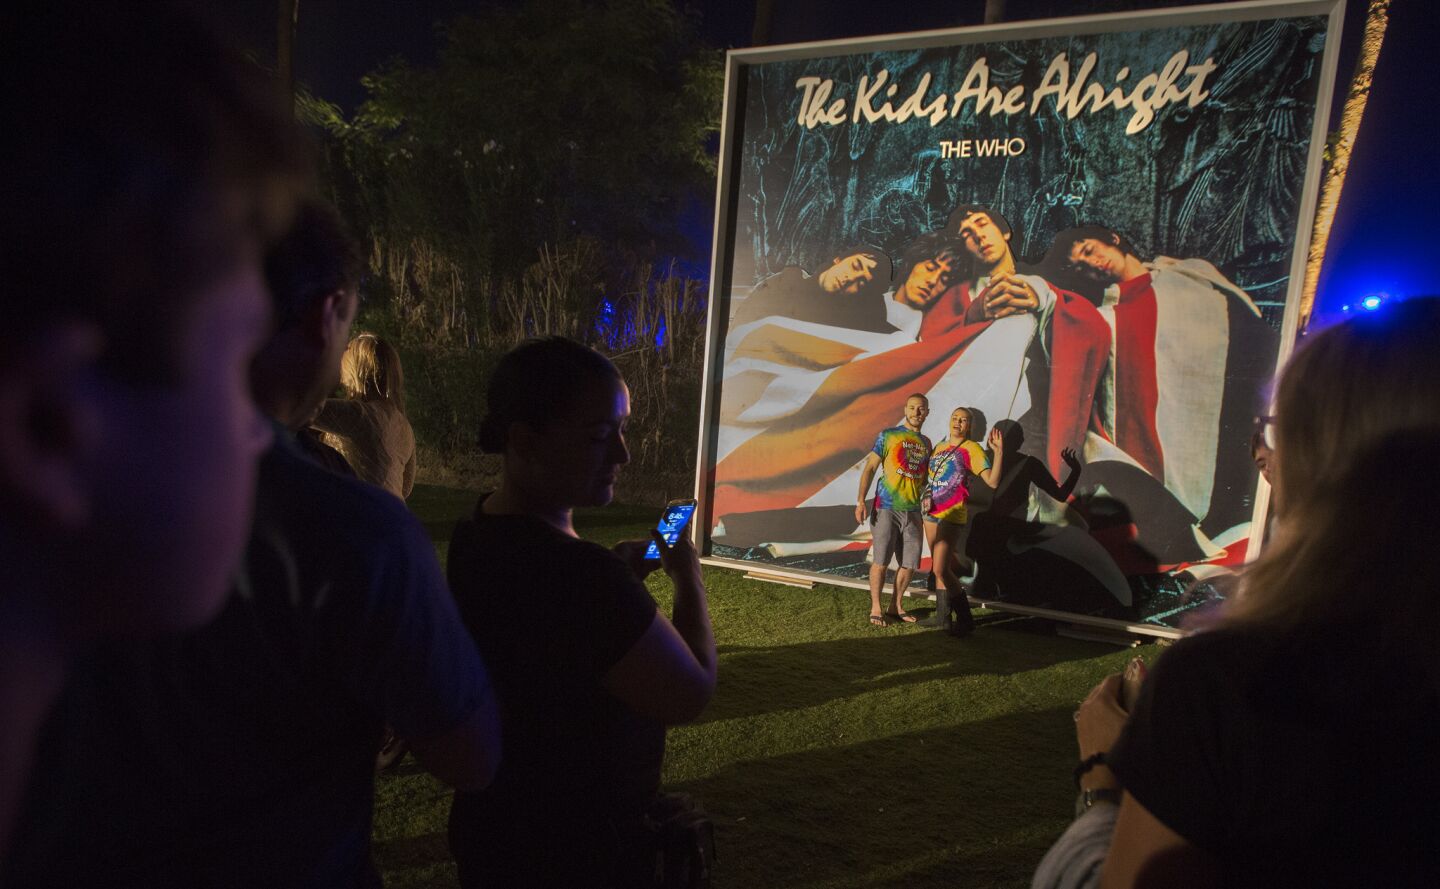 Fans pose for photos with a poster of The Who's "The Kids Are Alright" album.